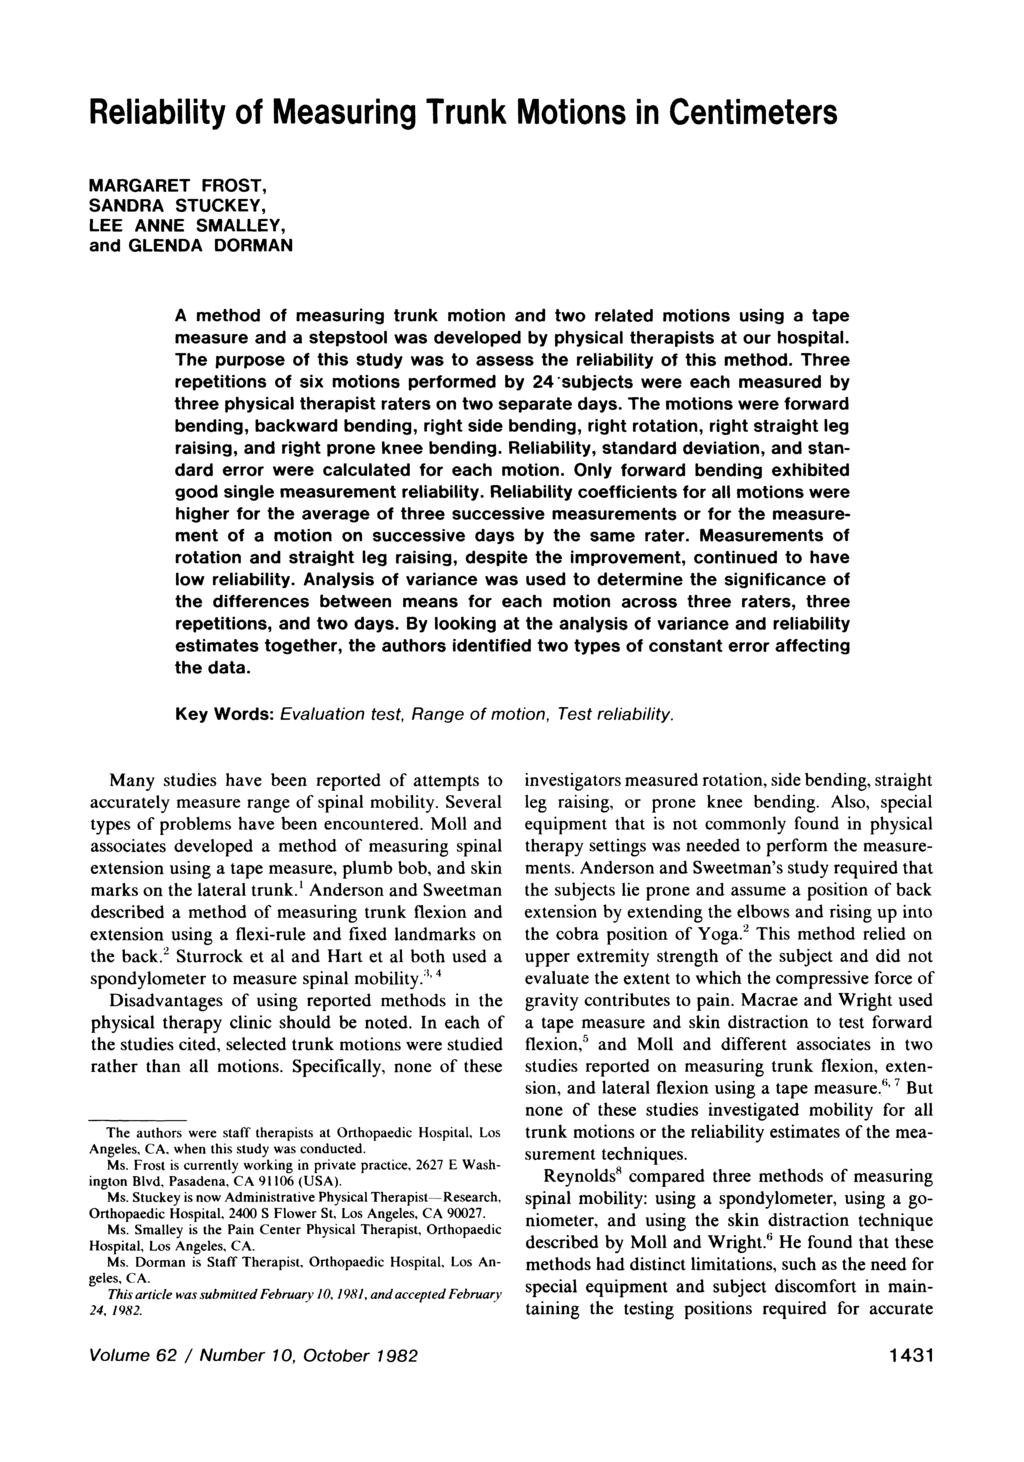 Reliability of Measuring Trunk Motions in Centimeters MARGARET ROST, SANDRA STUCKEY, LEE ANNE SMALLEY, and GLENDA DORMAN A method of measuring trunk motion and two related motions using a tape